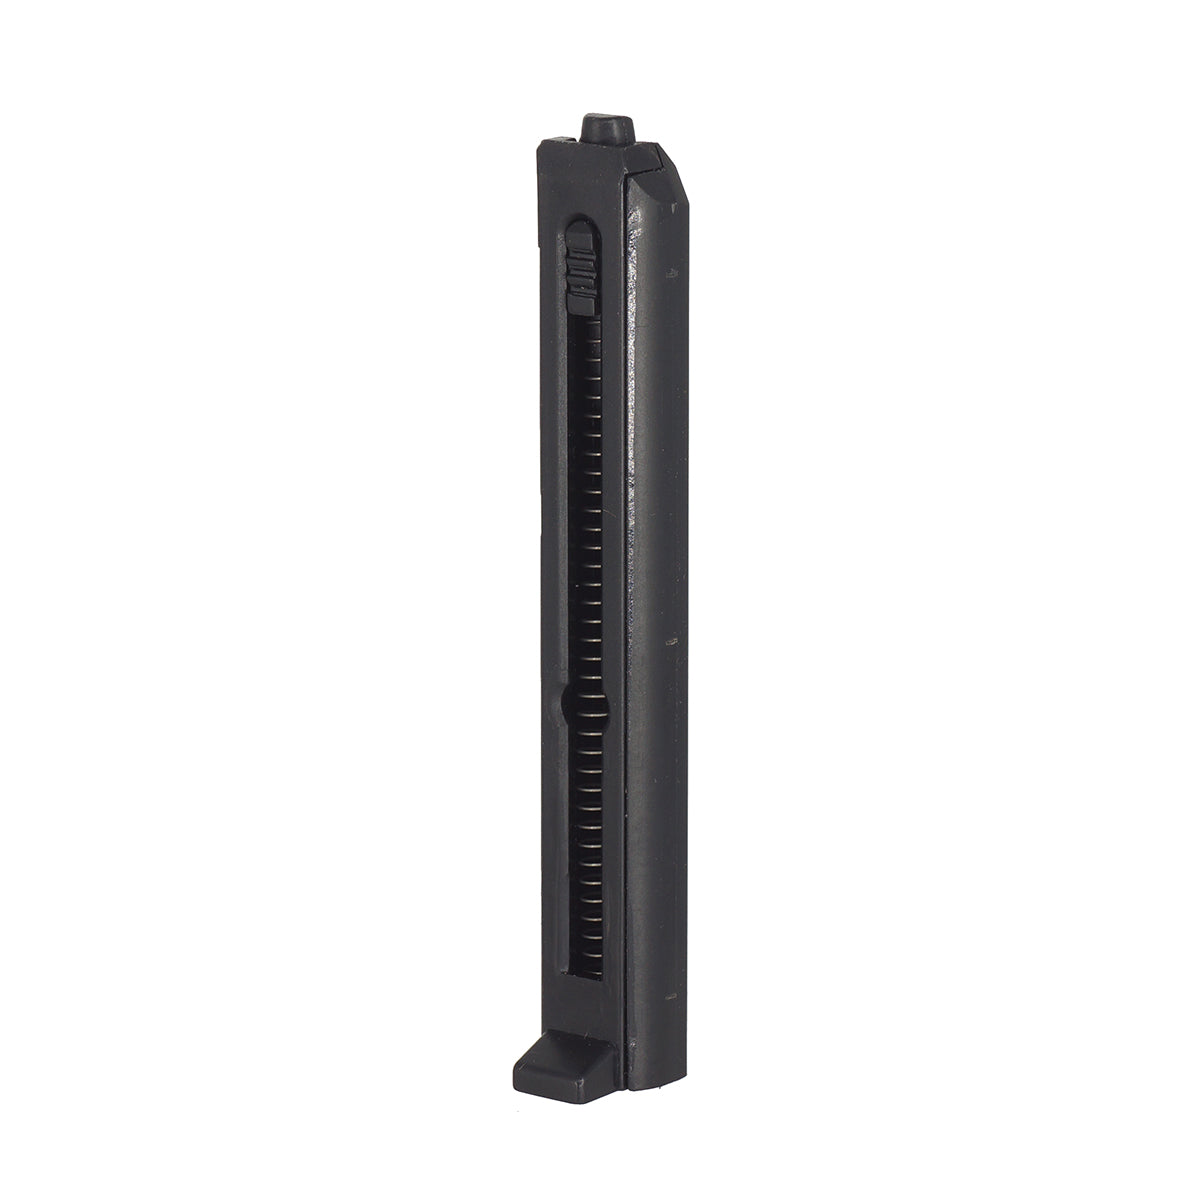 WELL 10 Rounds Magazine for G295 M11A1 CO2 Airsoft ( WELL-MAG-G295 )